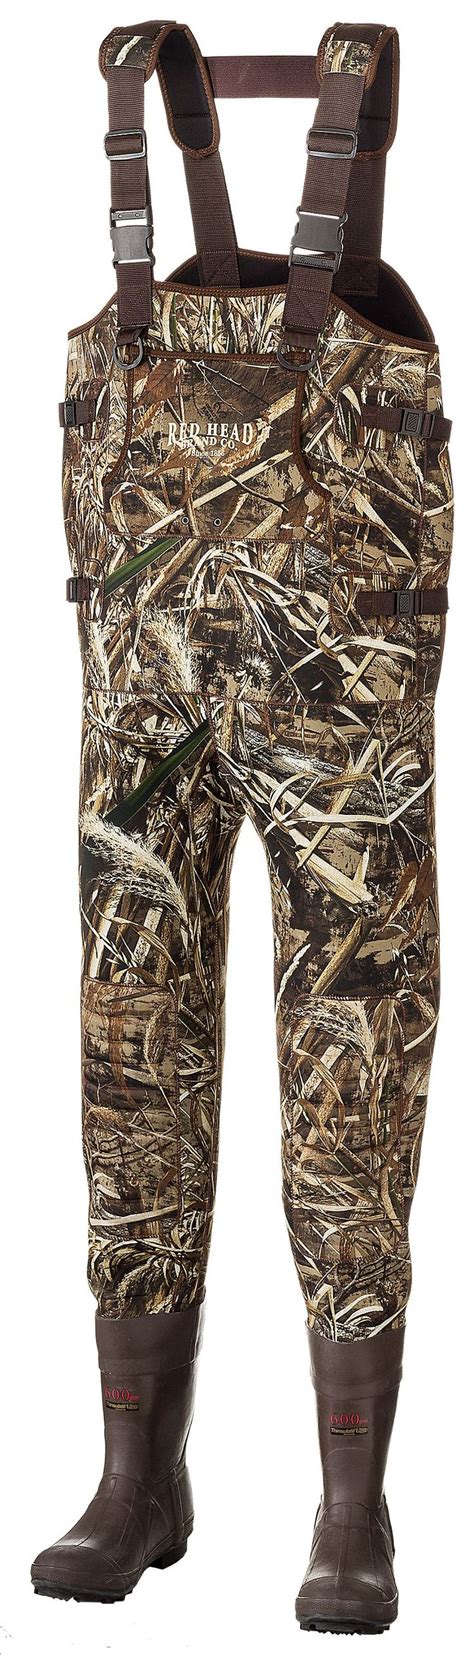 Buy the RedHead Canvasback Extreme Waders for Men and more quality Fishing, Hunting and Outdoor gear at Bass Pro Shops..